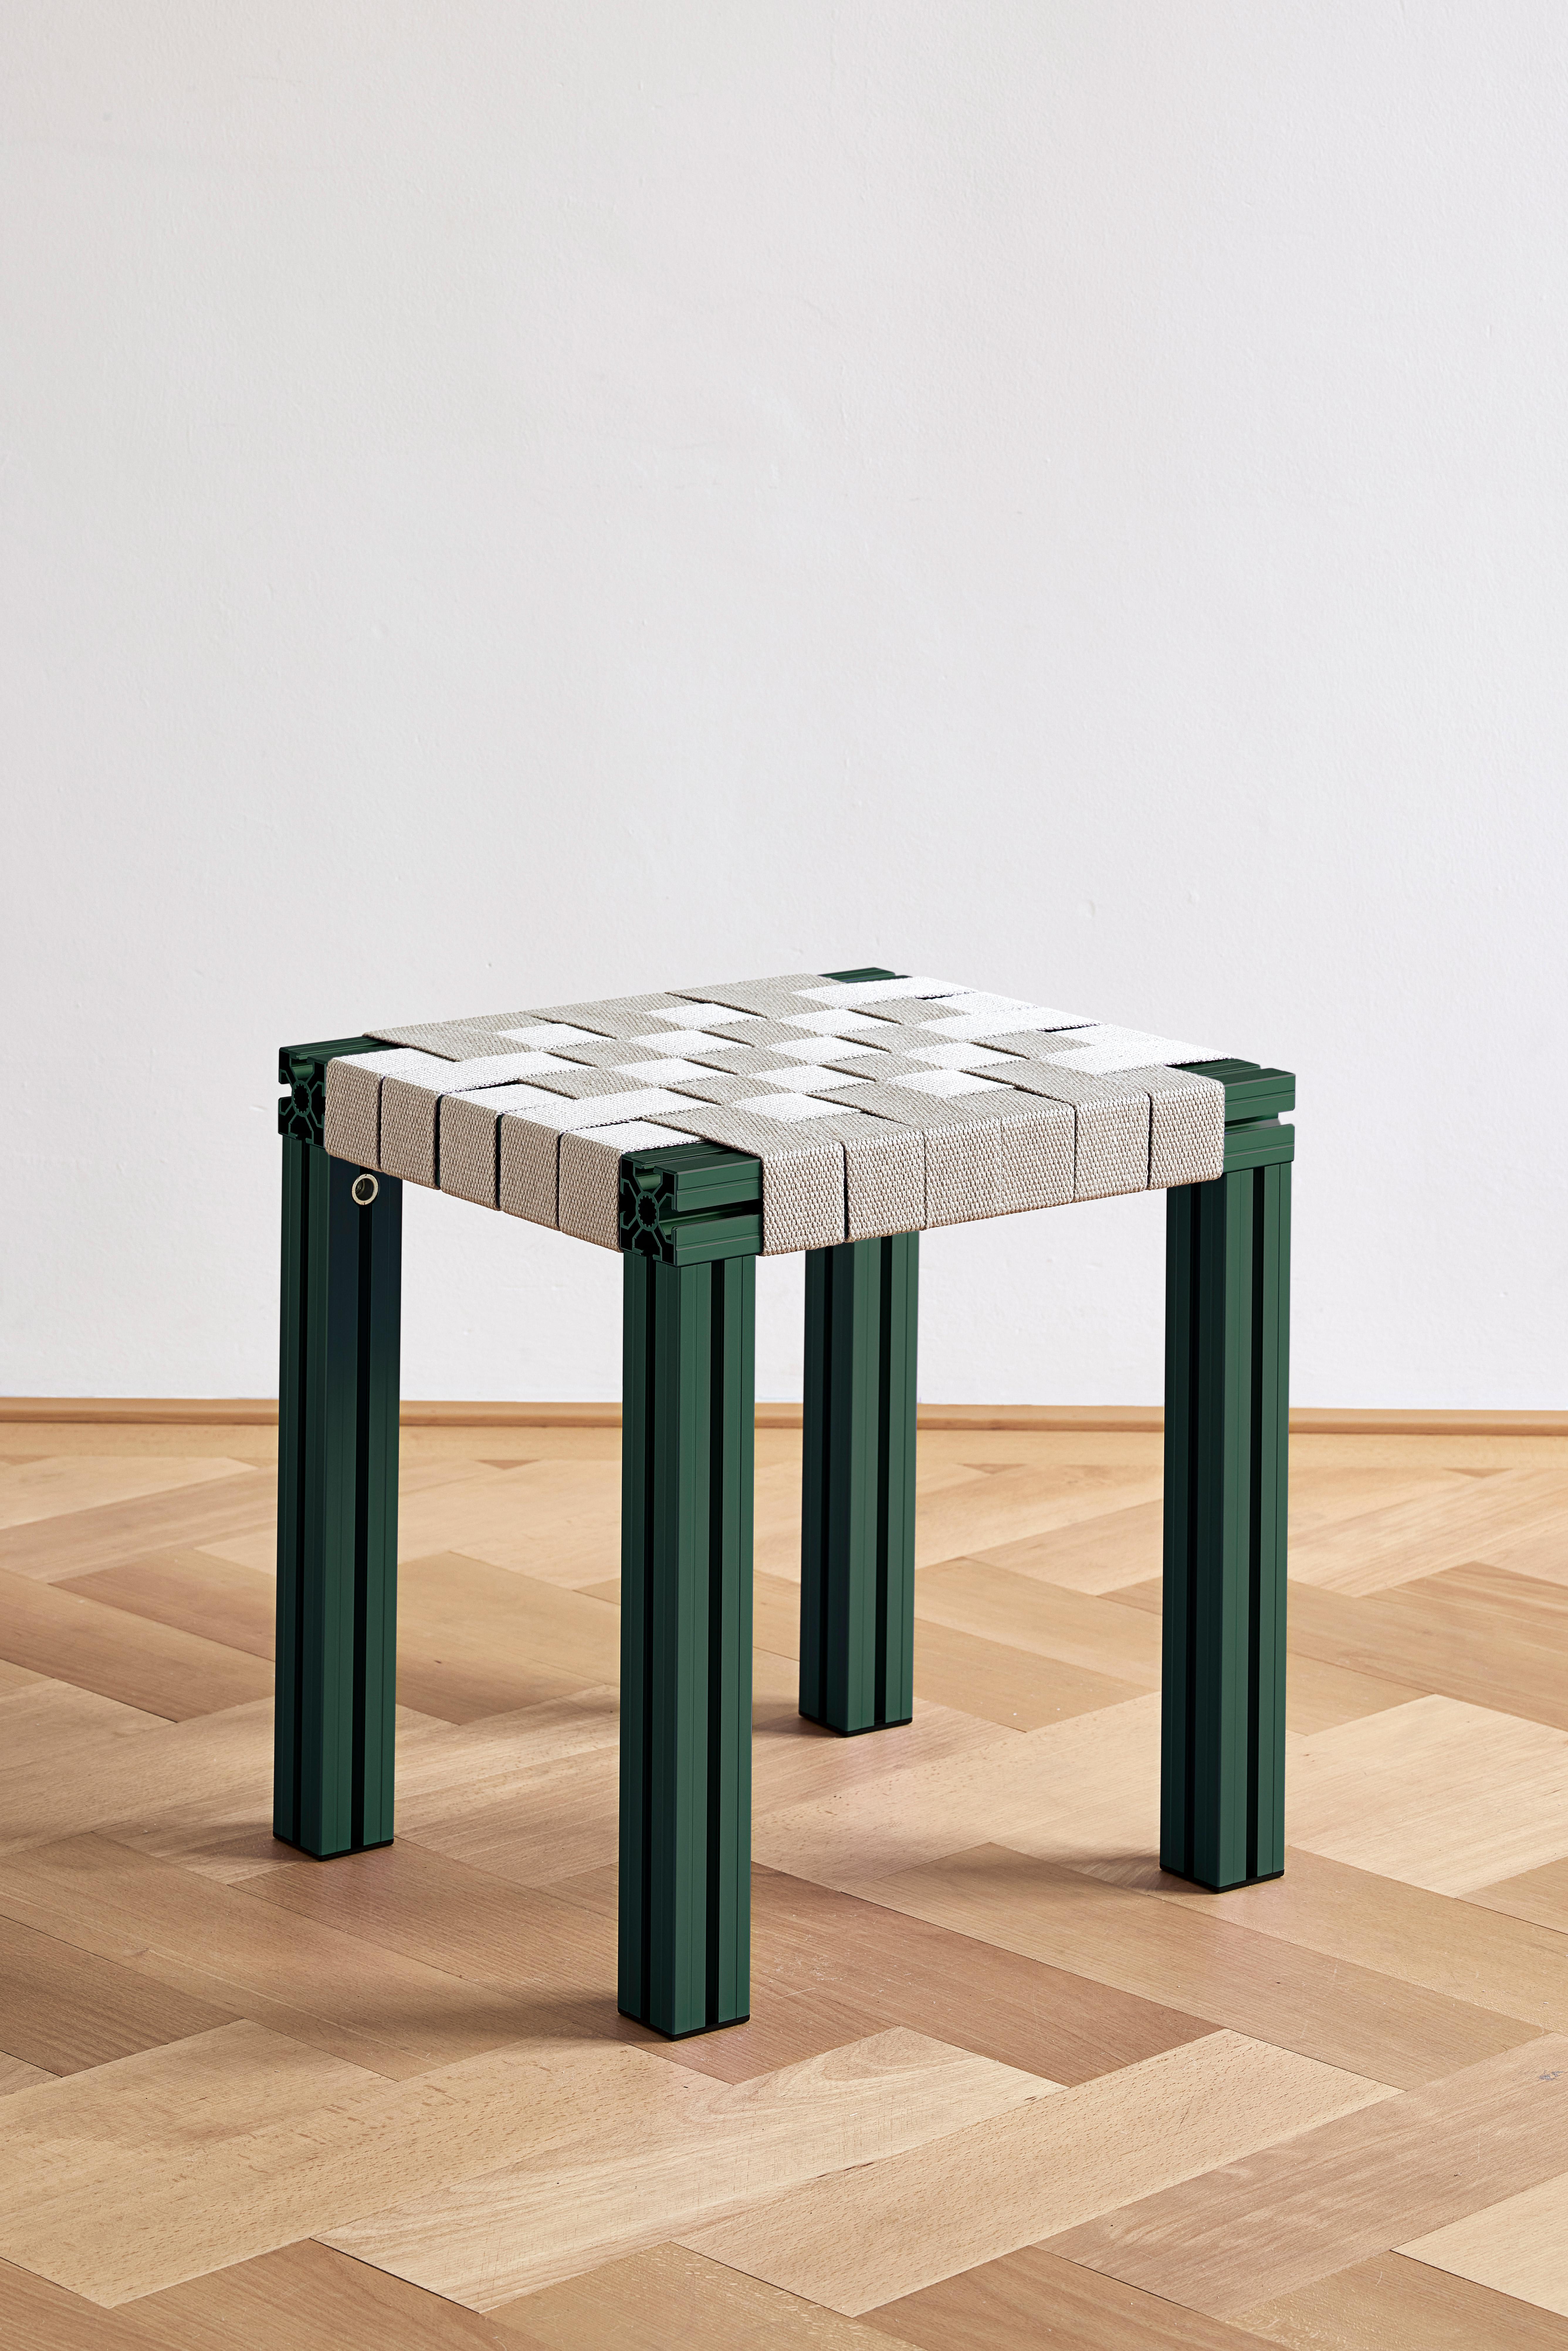 Anodized Green Aluminium Stool with Reel Rush Seating from Anodised Wicker Collection For Sale